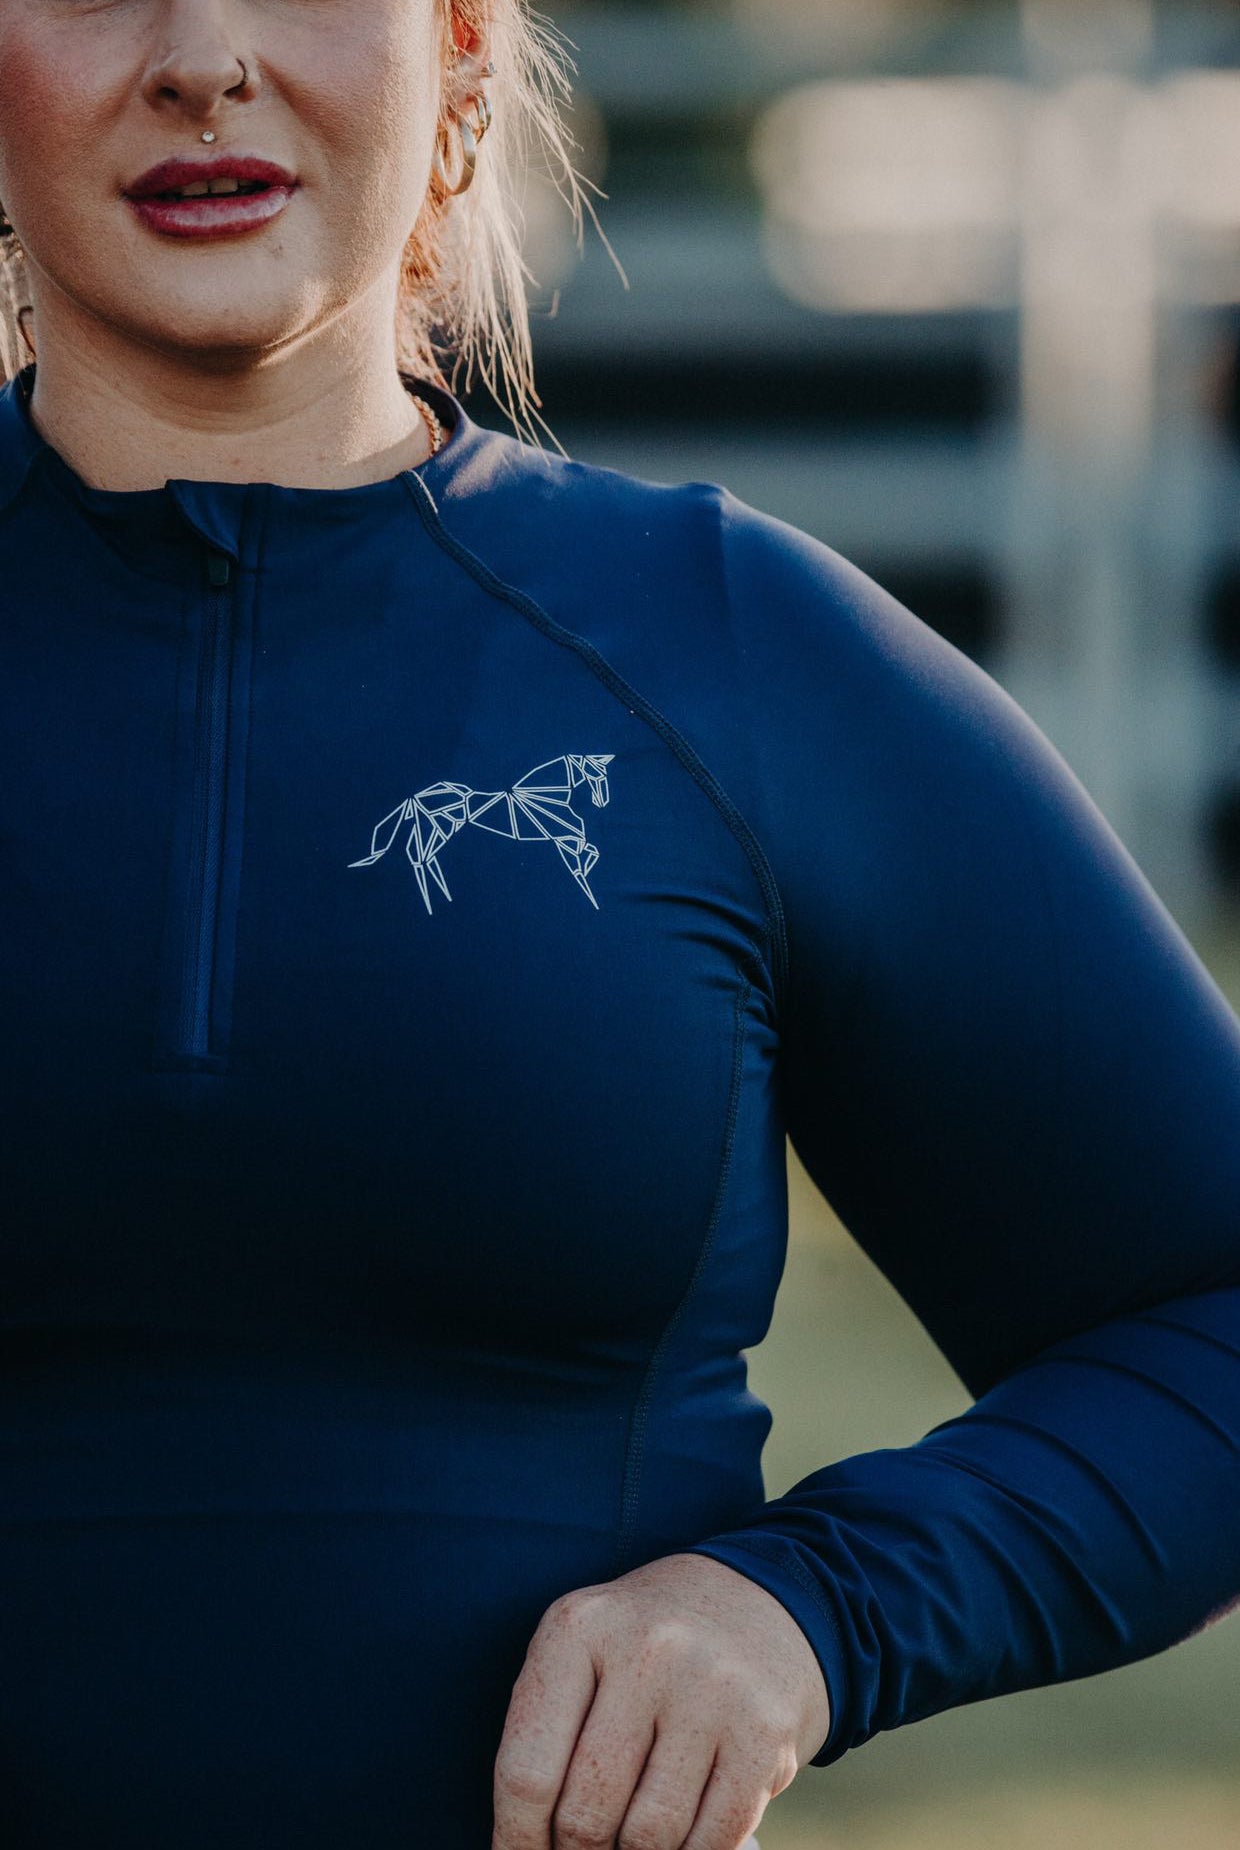 A close-up photograph of an equestrian base layer's fabric texture. The lightweight and stretchy material ensures freedom of movement, while the flatlock seams minimize friction for a chafe-free experience.